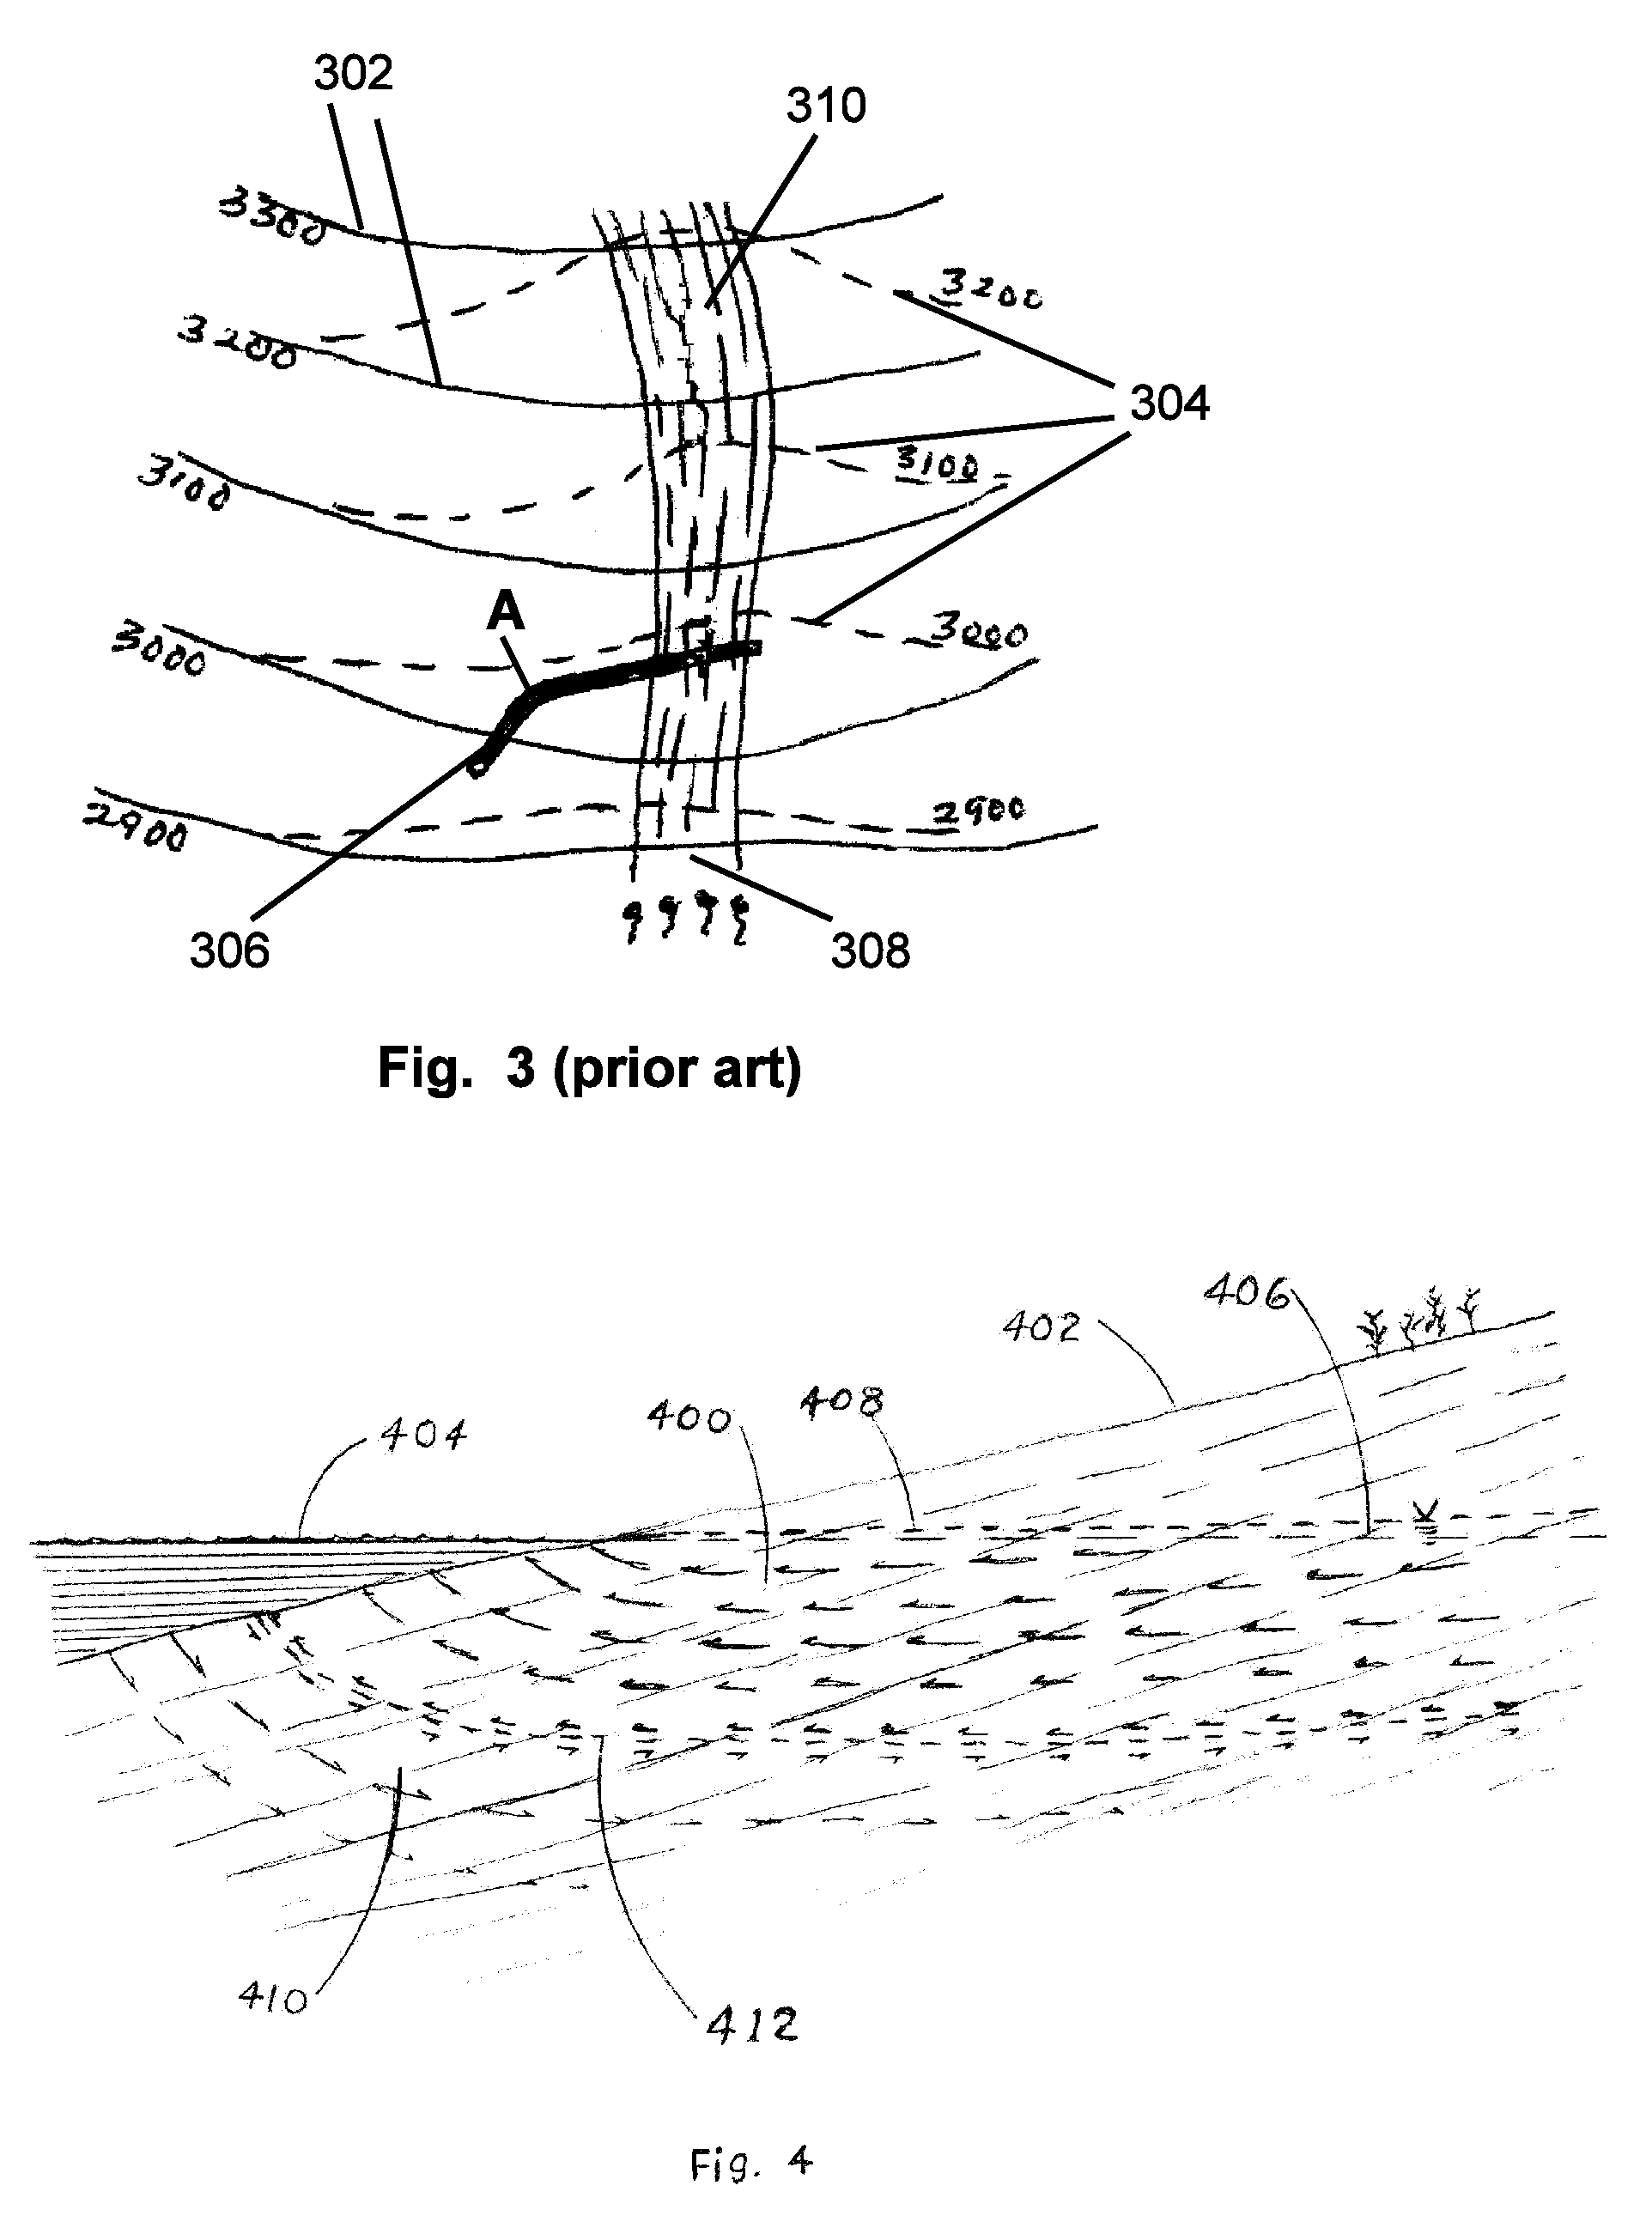 Deviated drilling method for water production